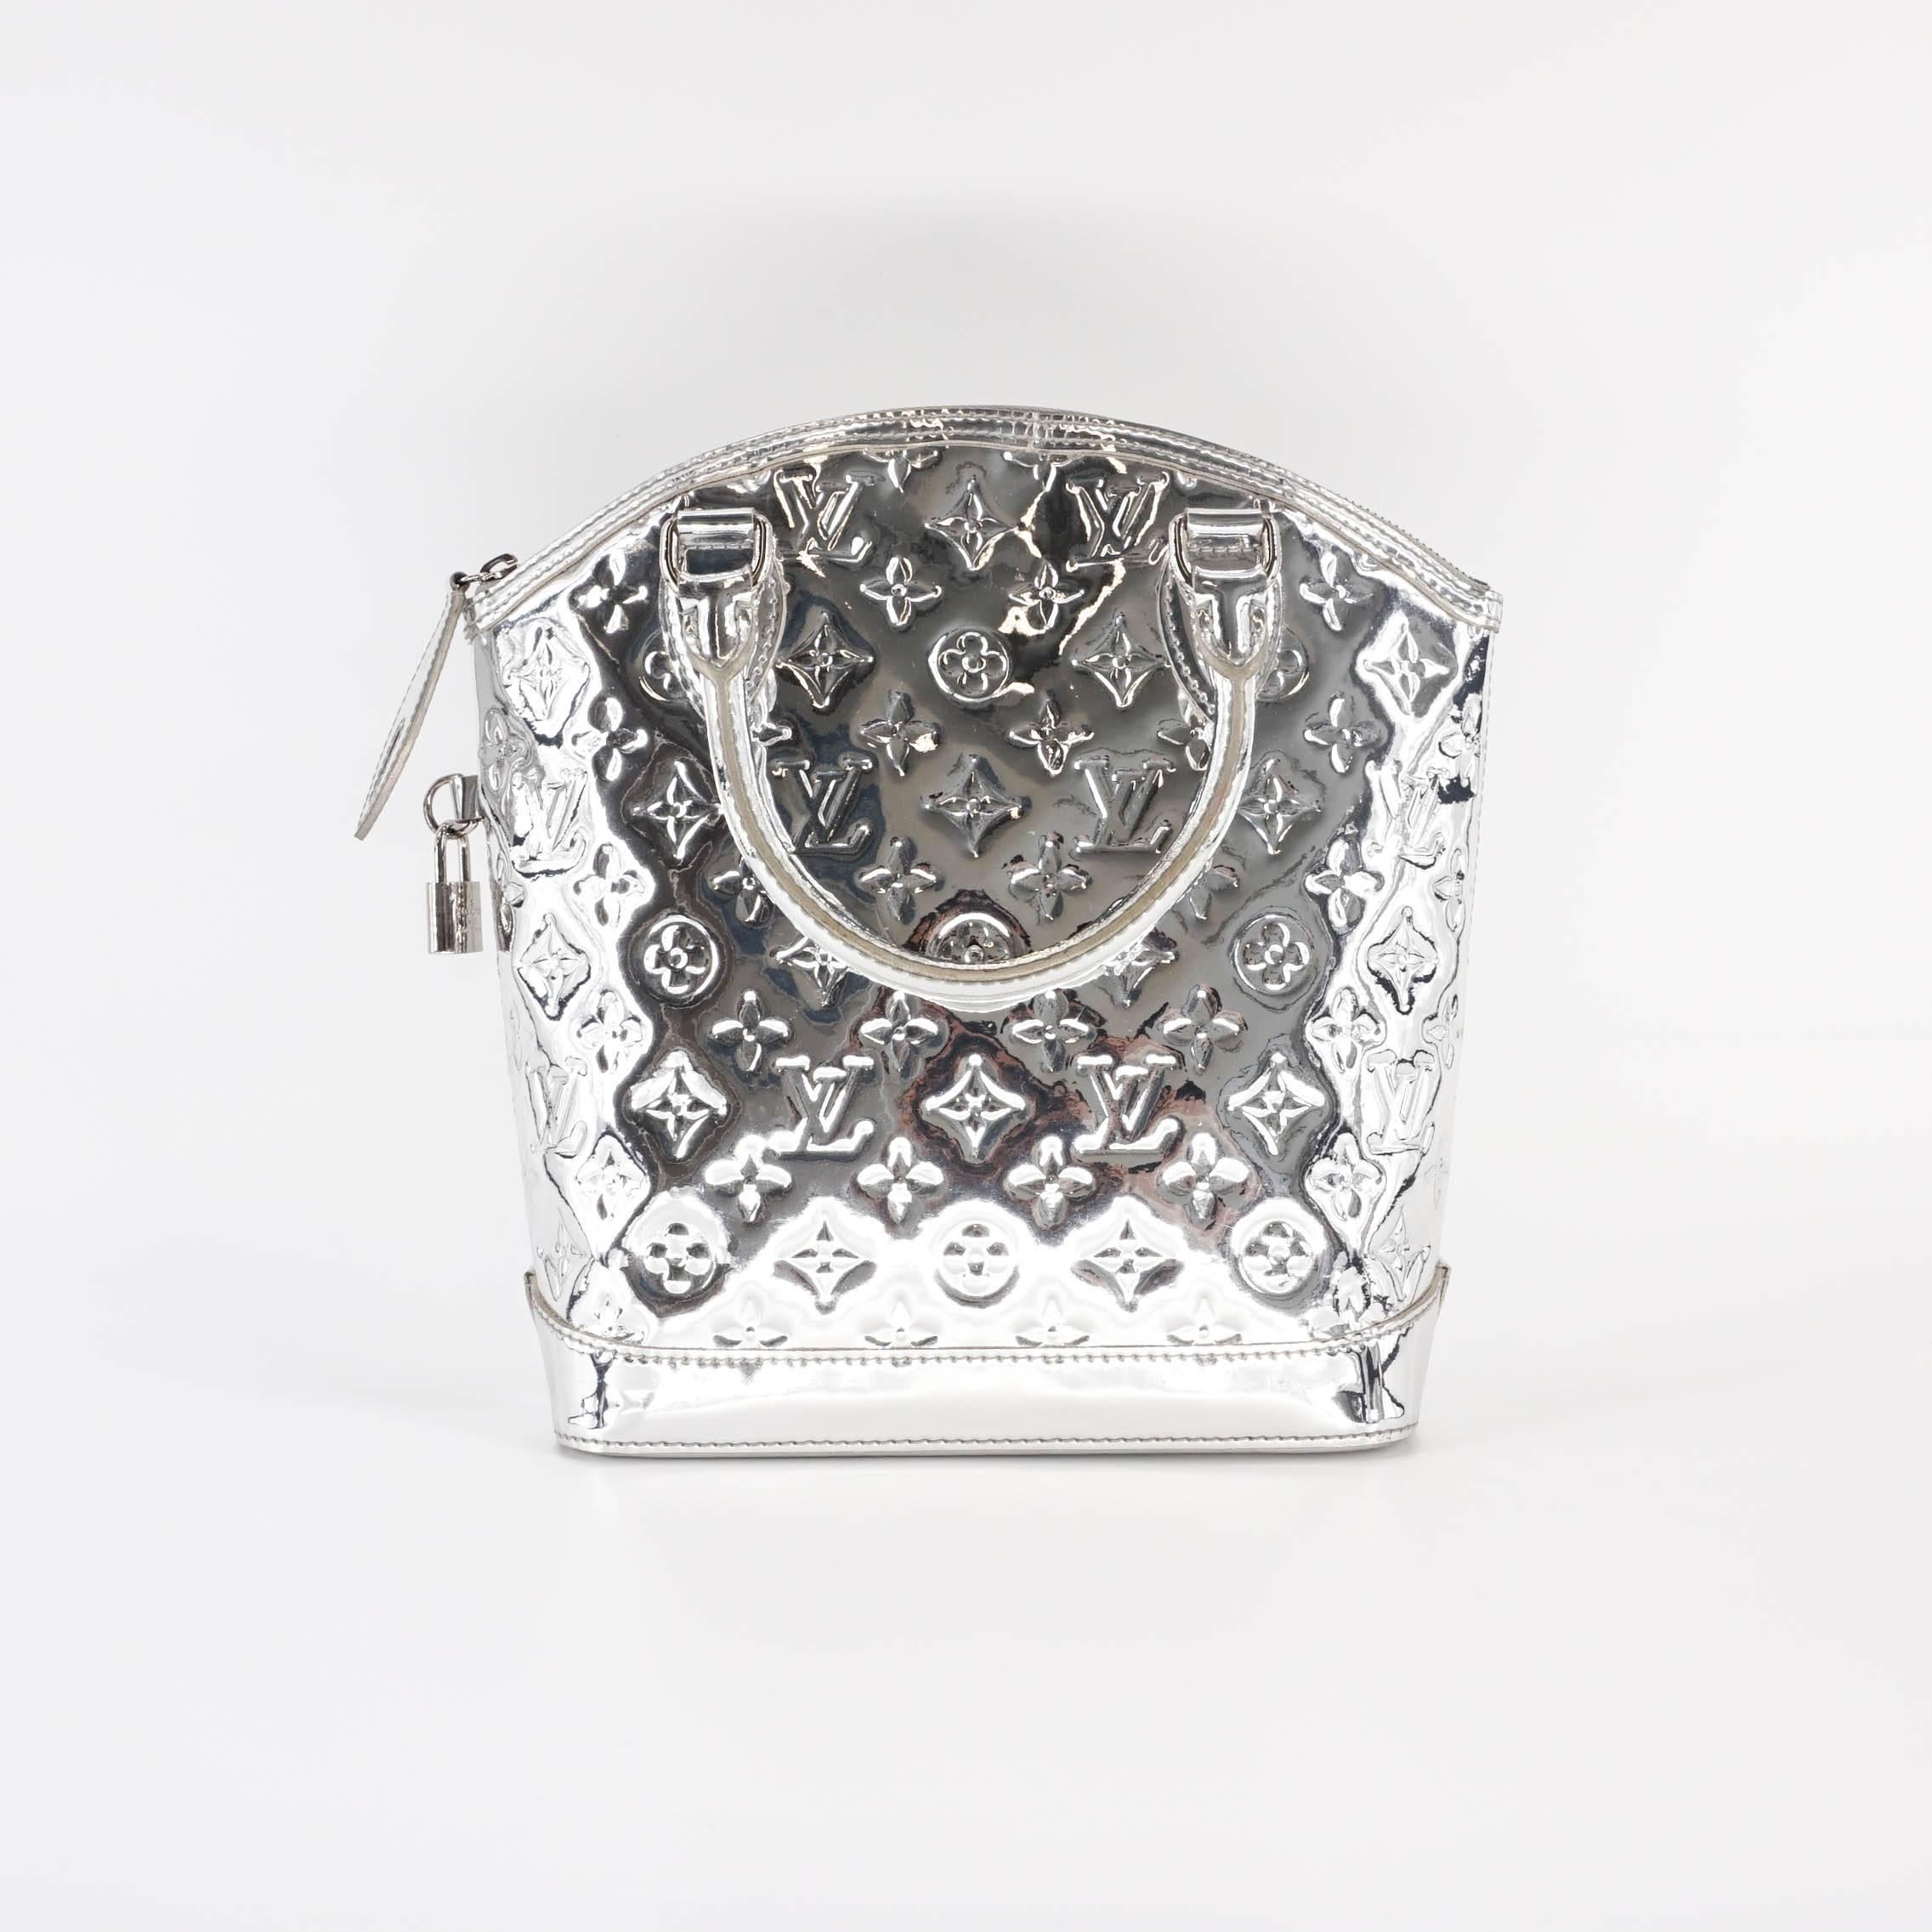 For metallic lovers and Louis Vuitton collectors, there simply is no other bag. The Louis Vuitton Miroir Lockit is a limited edition bag designed to make your glitzy glamorous fantasies come true. You'll stay organized with one interior flat pocket